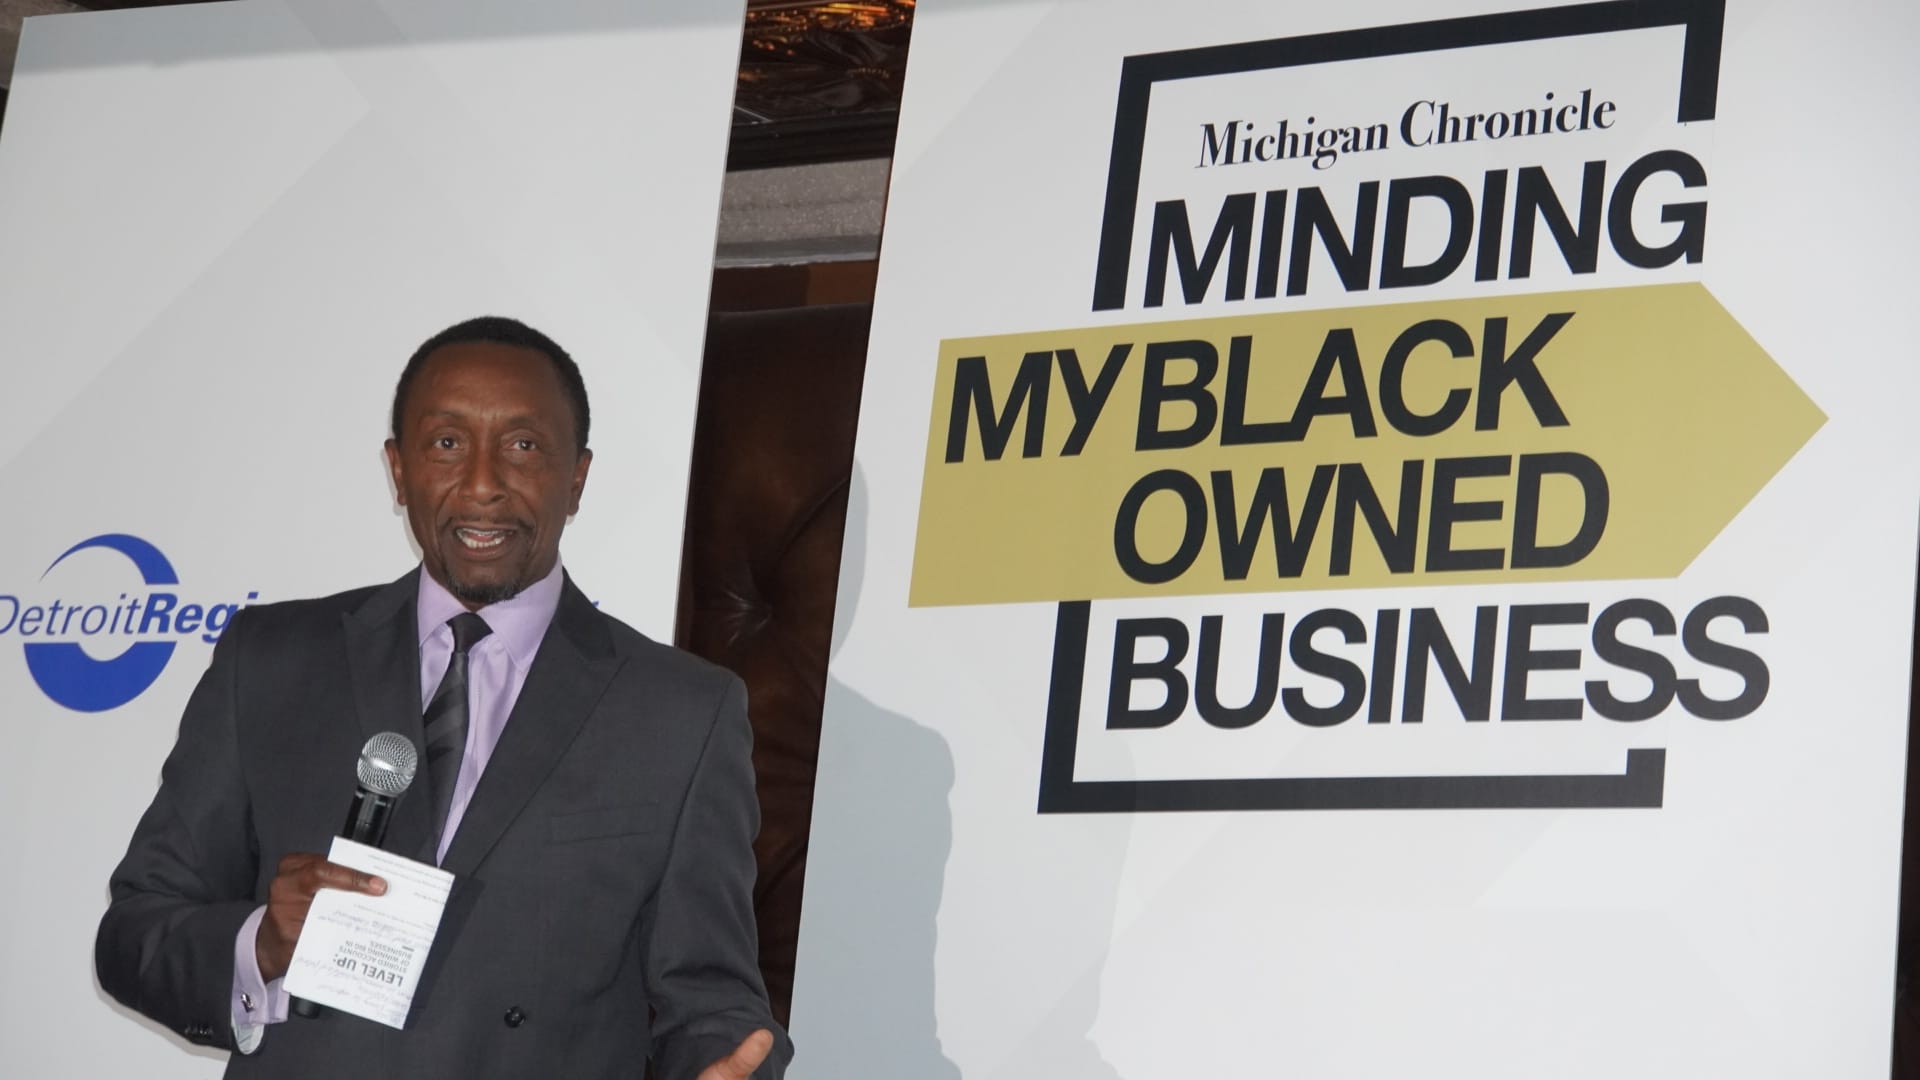 a-night-of-empowerment-at-inaugural-‘minding-my-black-owned-business’-event-in-detroit-|-the-michigan-chronicle